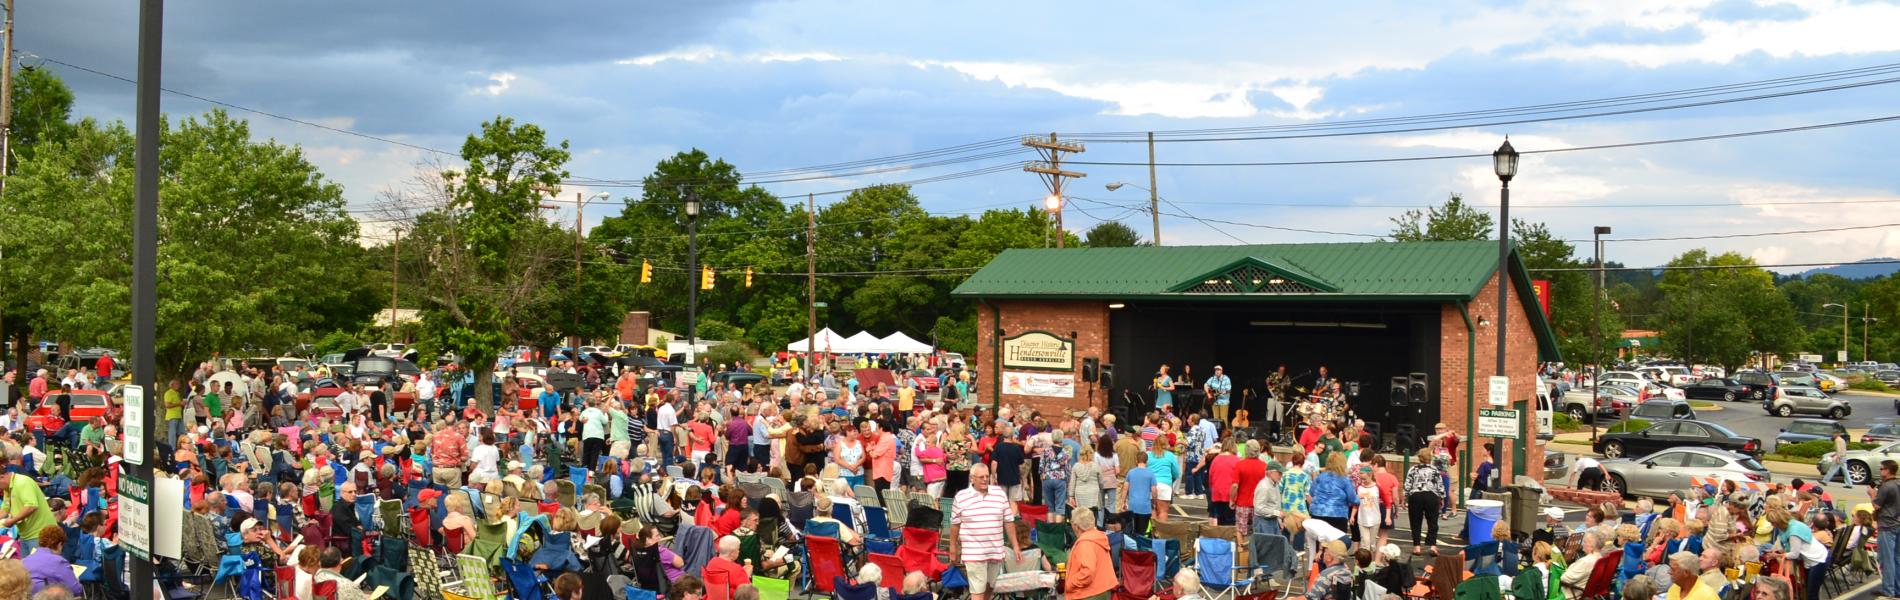 Music on Main Street, Live Music, Outdoor Concert